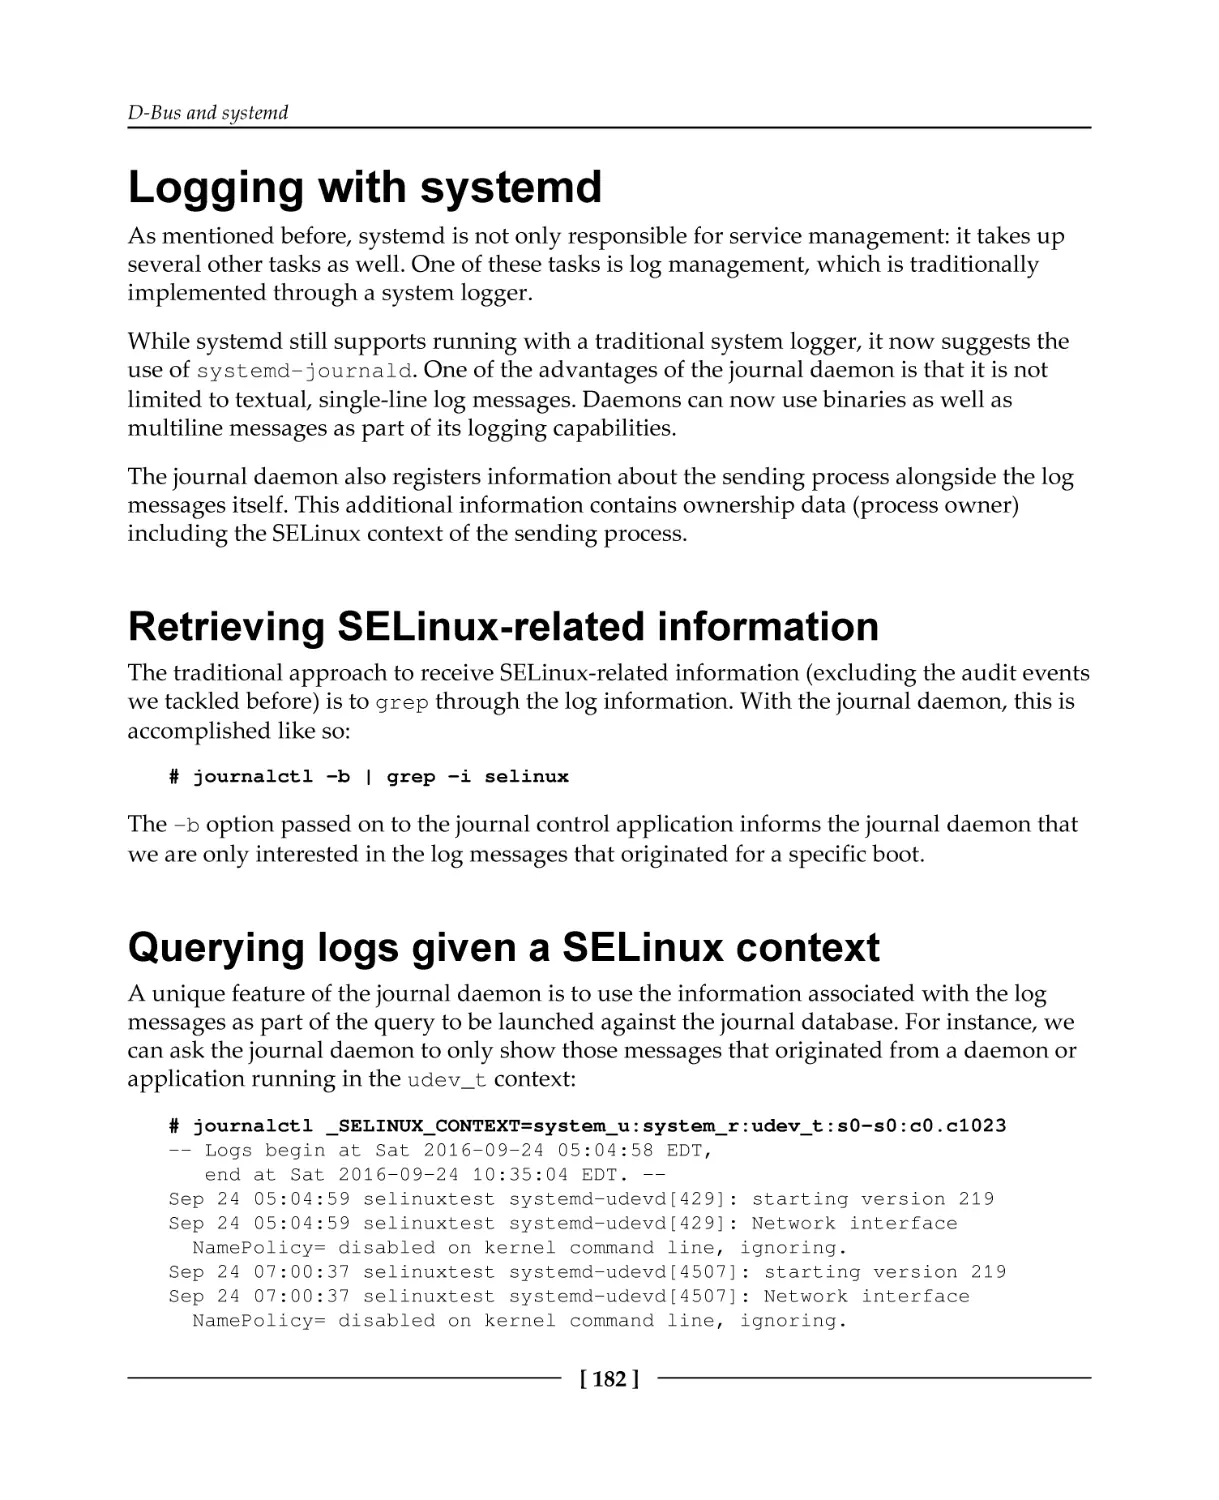 Logging with systemd
Retrieving SELinux-related information
Querying logs given a SELinux context